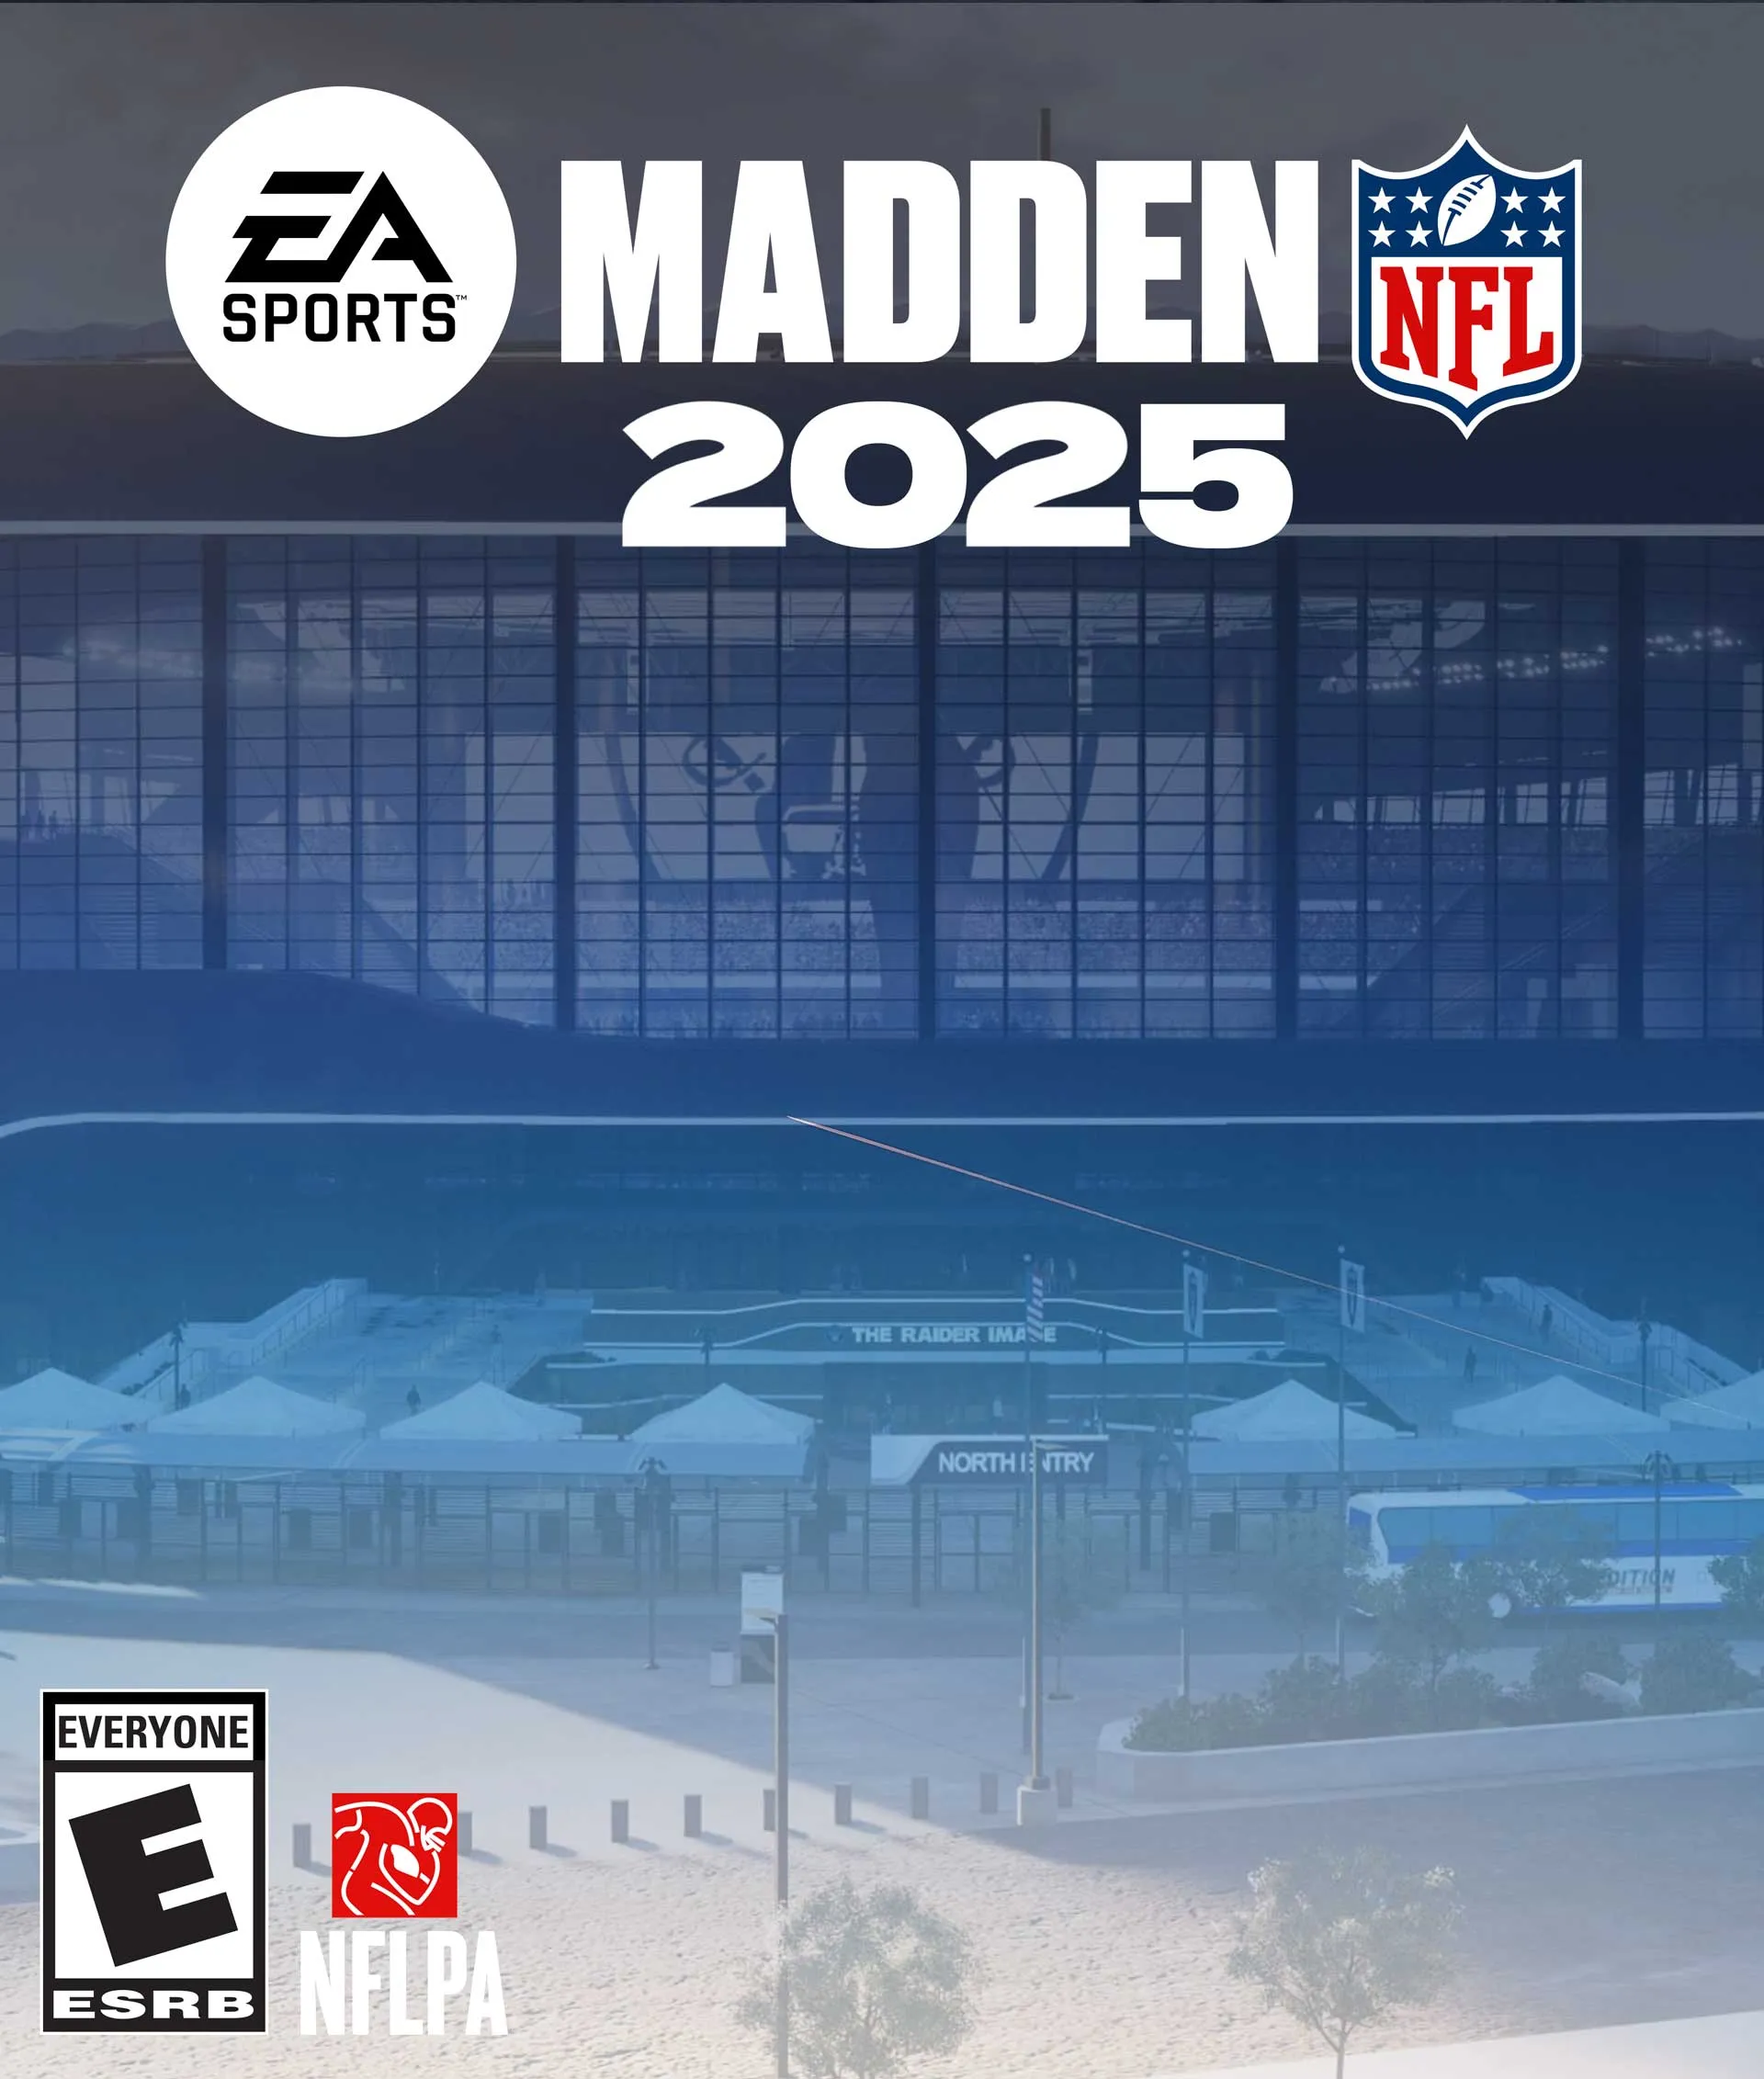 madden 12 for sale